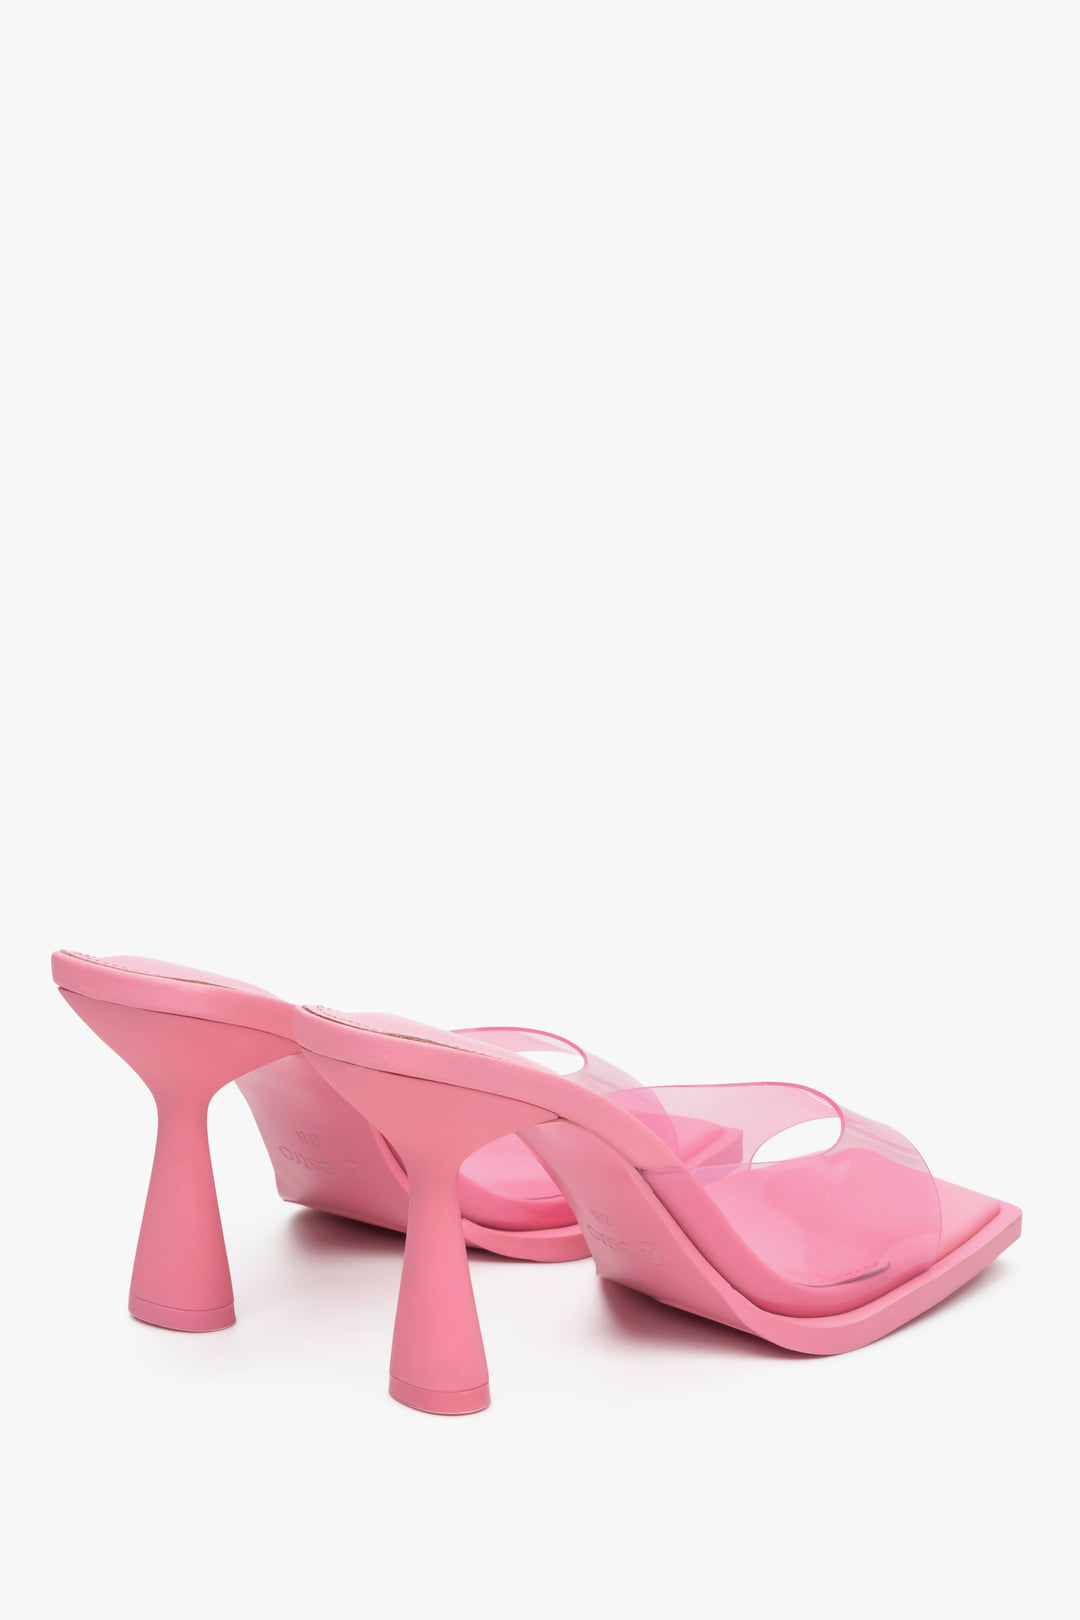 Estro women's high-heeled sandals with a pink sole - close-up on the rear part of the footwear.